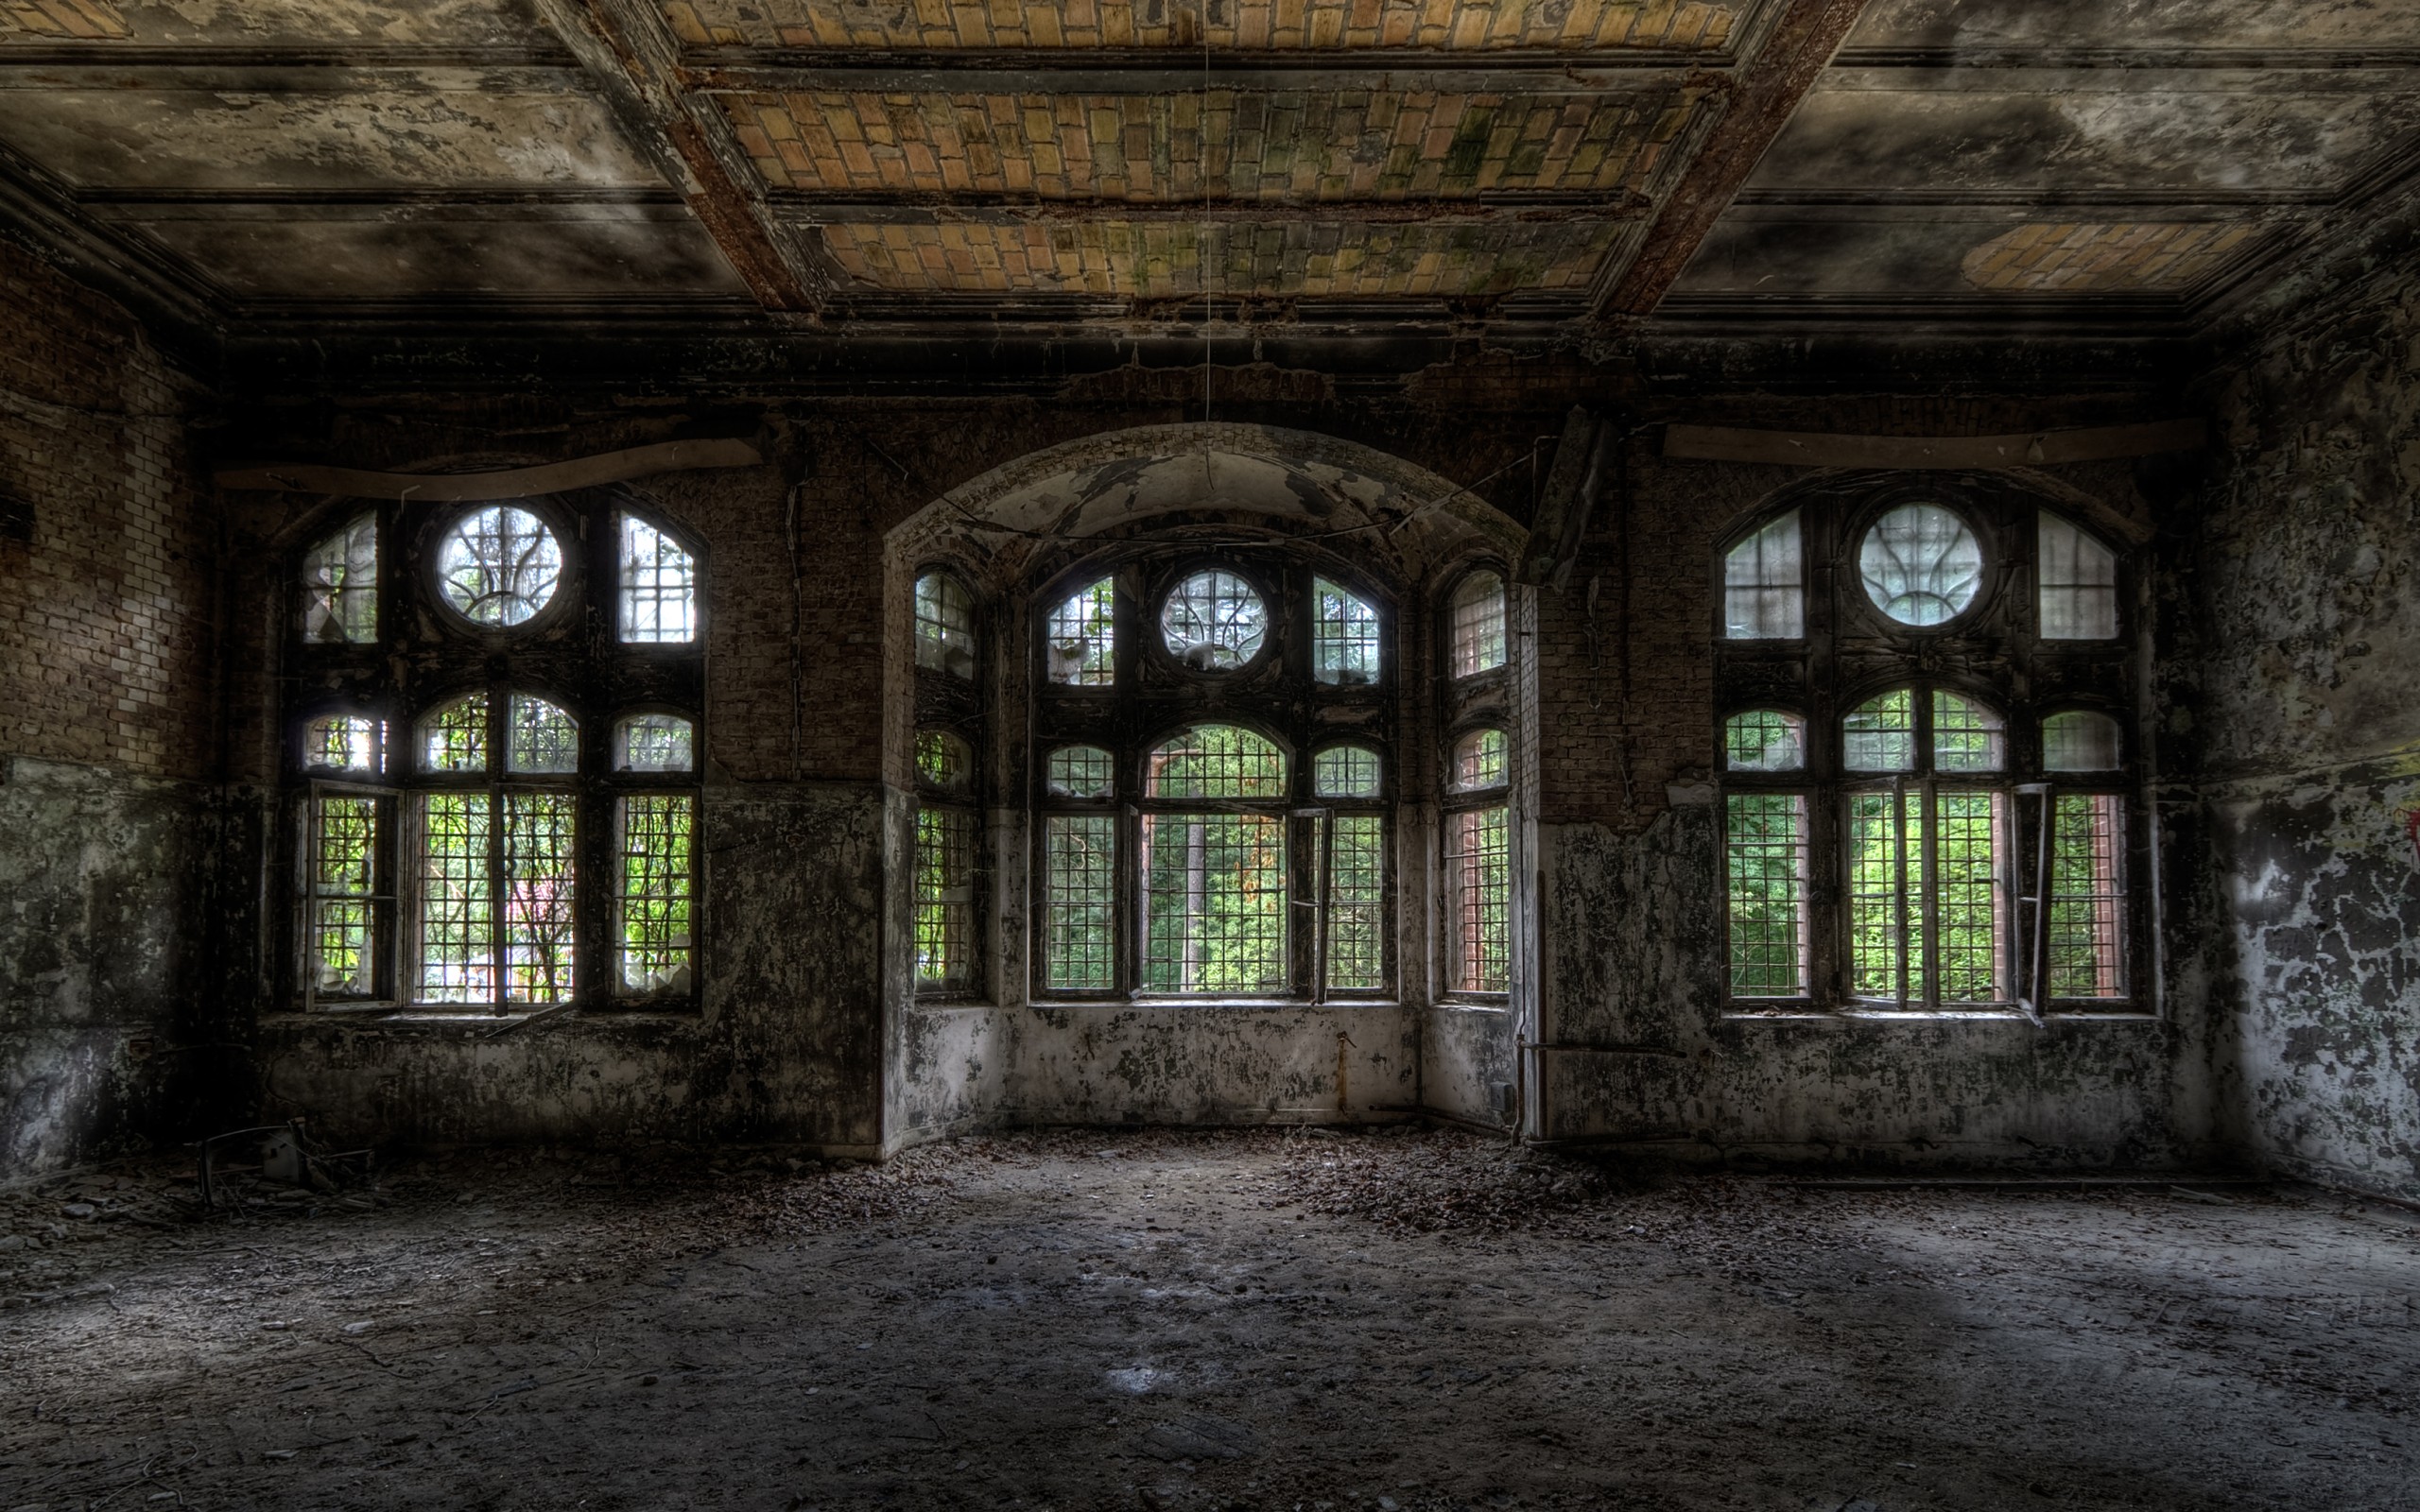 General 2560x1600 HDR abandoned window indoors house room architecture ruins old